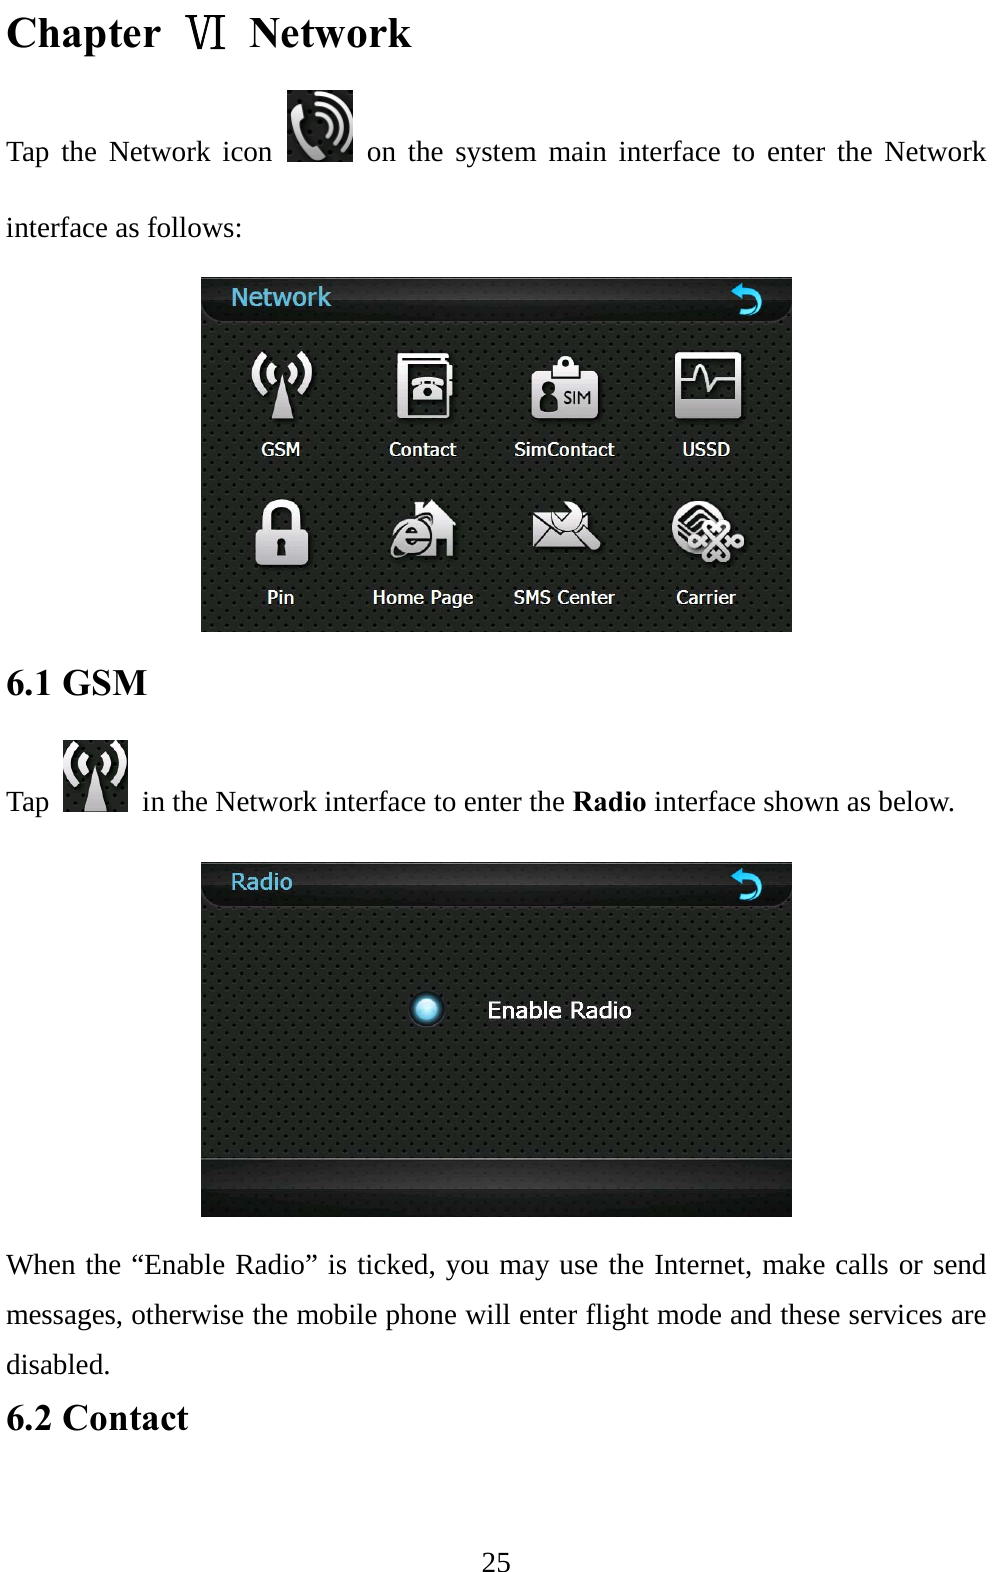  25 Chapter Ⅵ Network Tap the Network icon   on the system main interface to enter the Network interface as follows:  6.1 GSM Tap    in the Network interface to enter the Radio interface shown as below.  When the “Enable Radio” is ticked, you may use the Internet, make calls or send messages, otherwise the mobile phone will enter flight mode and these services are disabled. 6.2 Contact   